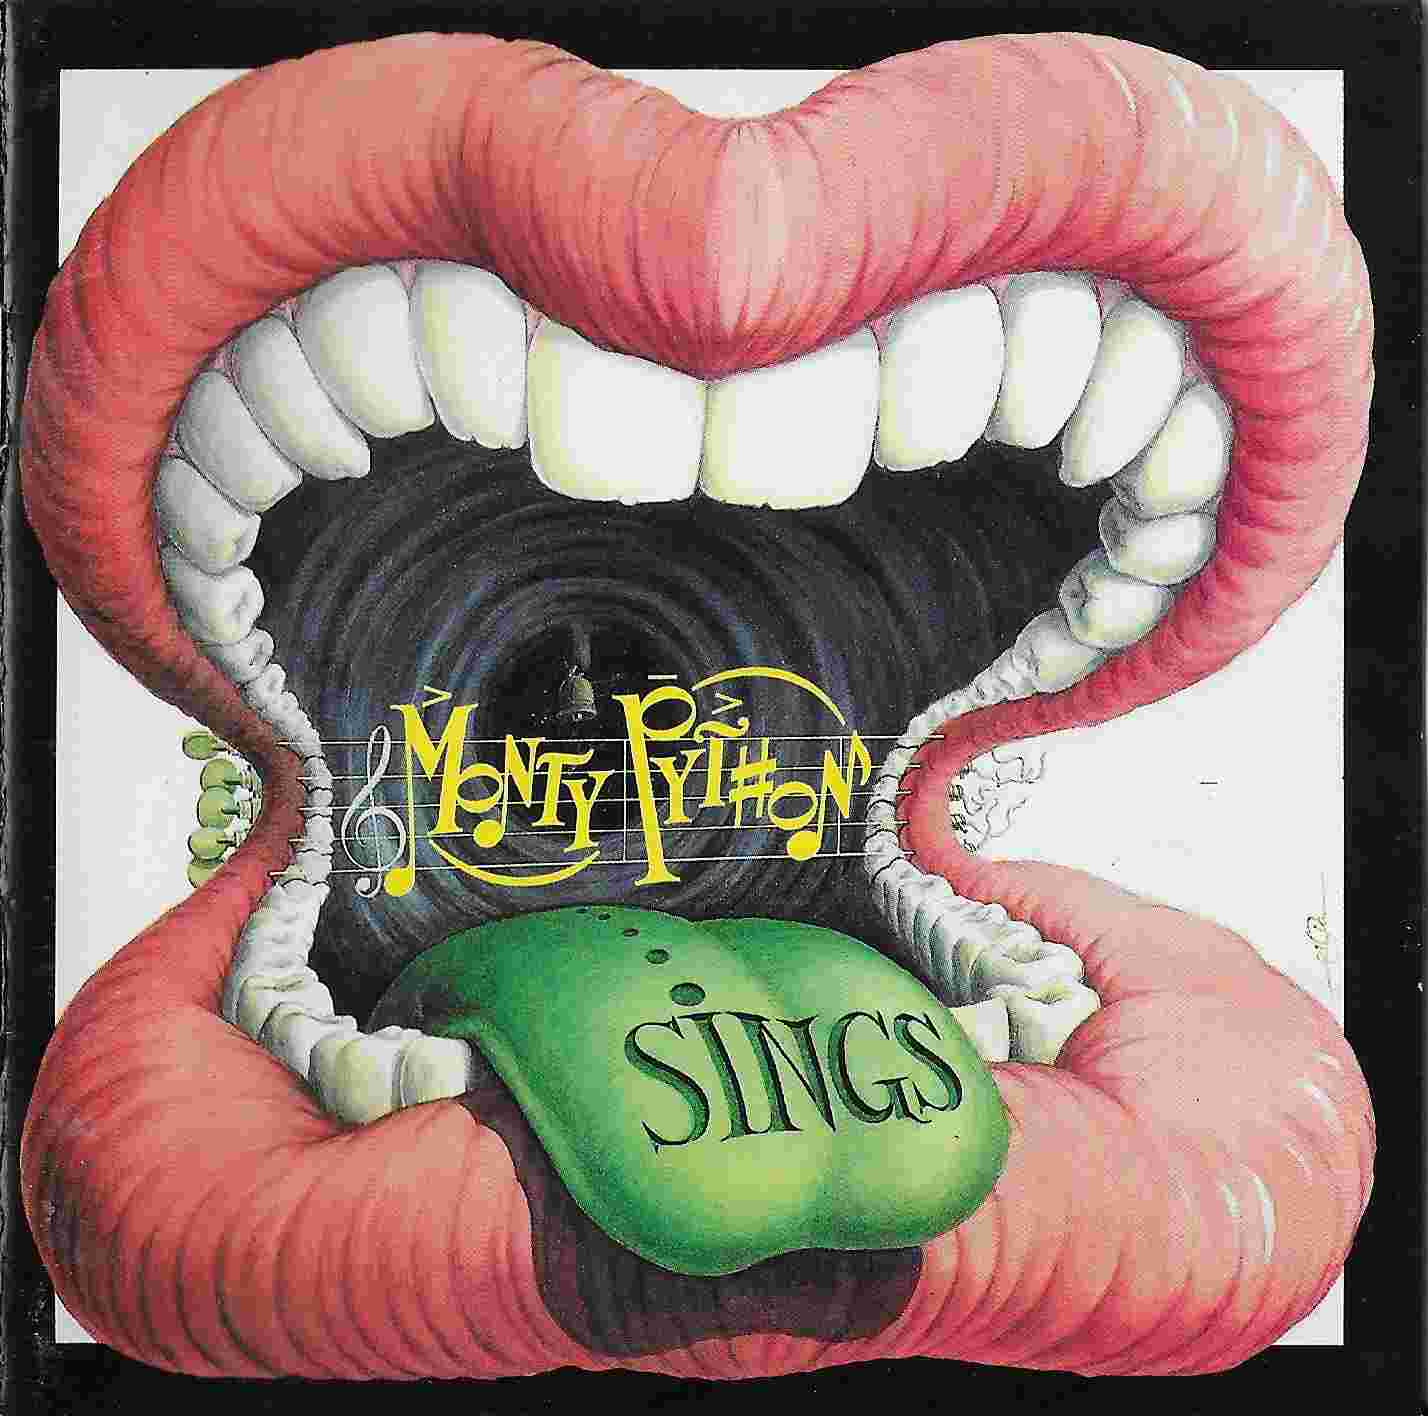 Picture of Monty Python sings by artist Monty Python from the BBC cds - Records and Tapes library